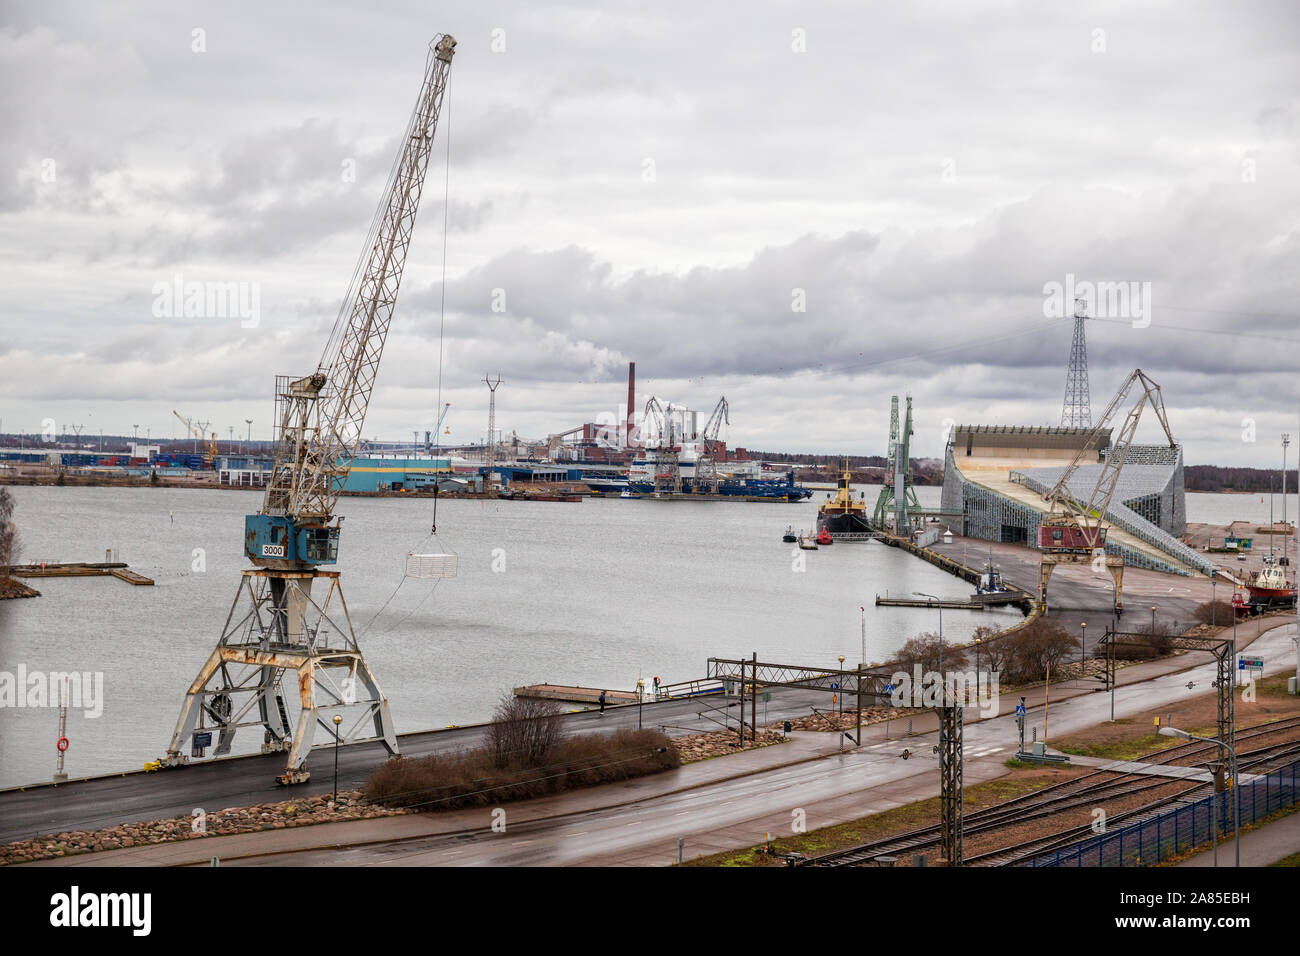 KOTKA, FINLAND - NOVEMBER 02, 2019: View of one of port areas of Kotka, port  cranes, Sunila pulp and paper mill and Vellamo maritime centre Stock Photo  - Alamy